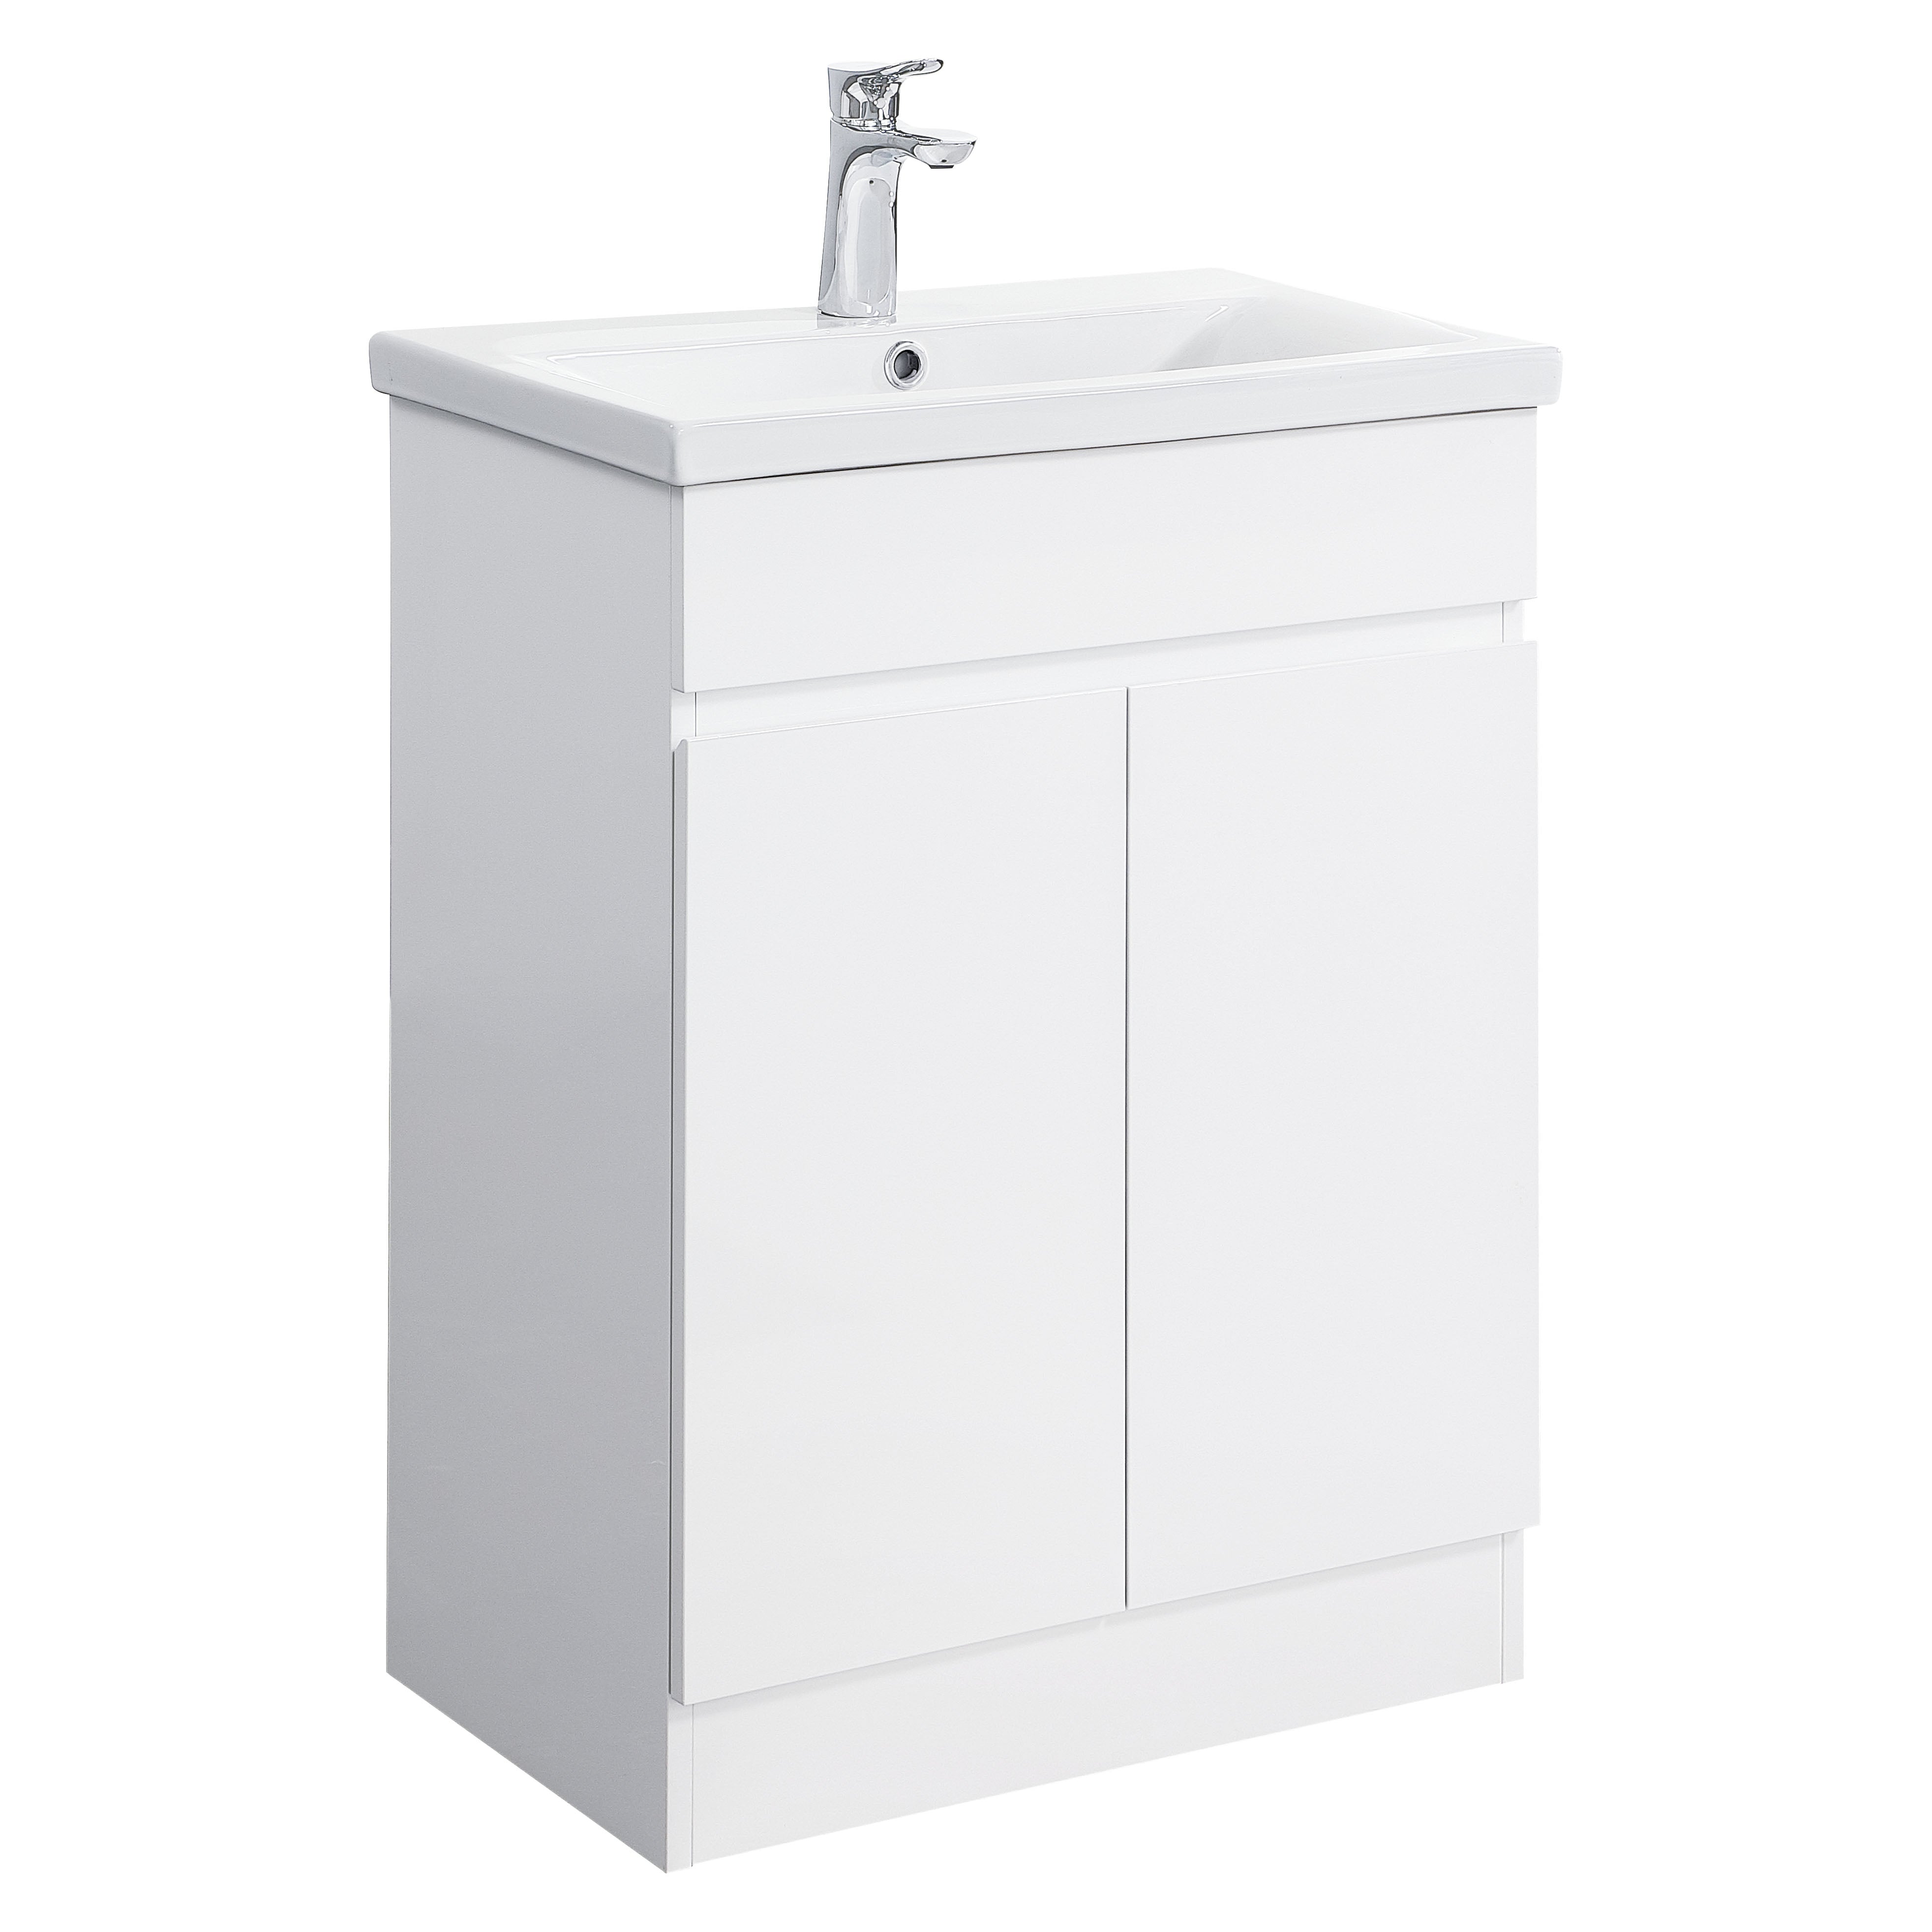 Trent Square Vanity Unit With Mid-Edged Basin - 600mm x 400mm - Gloss White (Flat Pack)